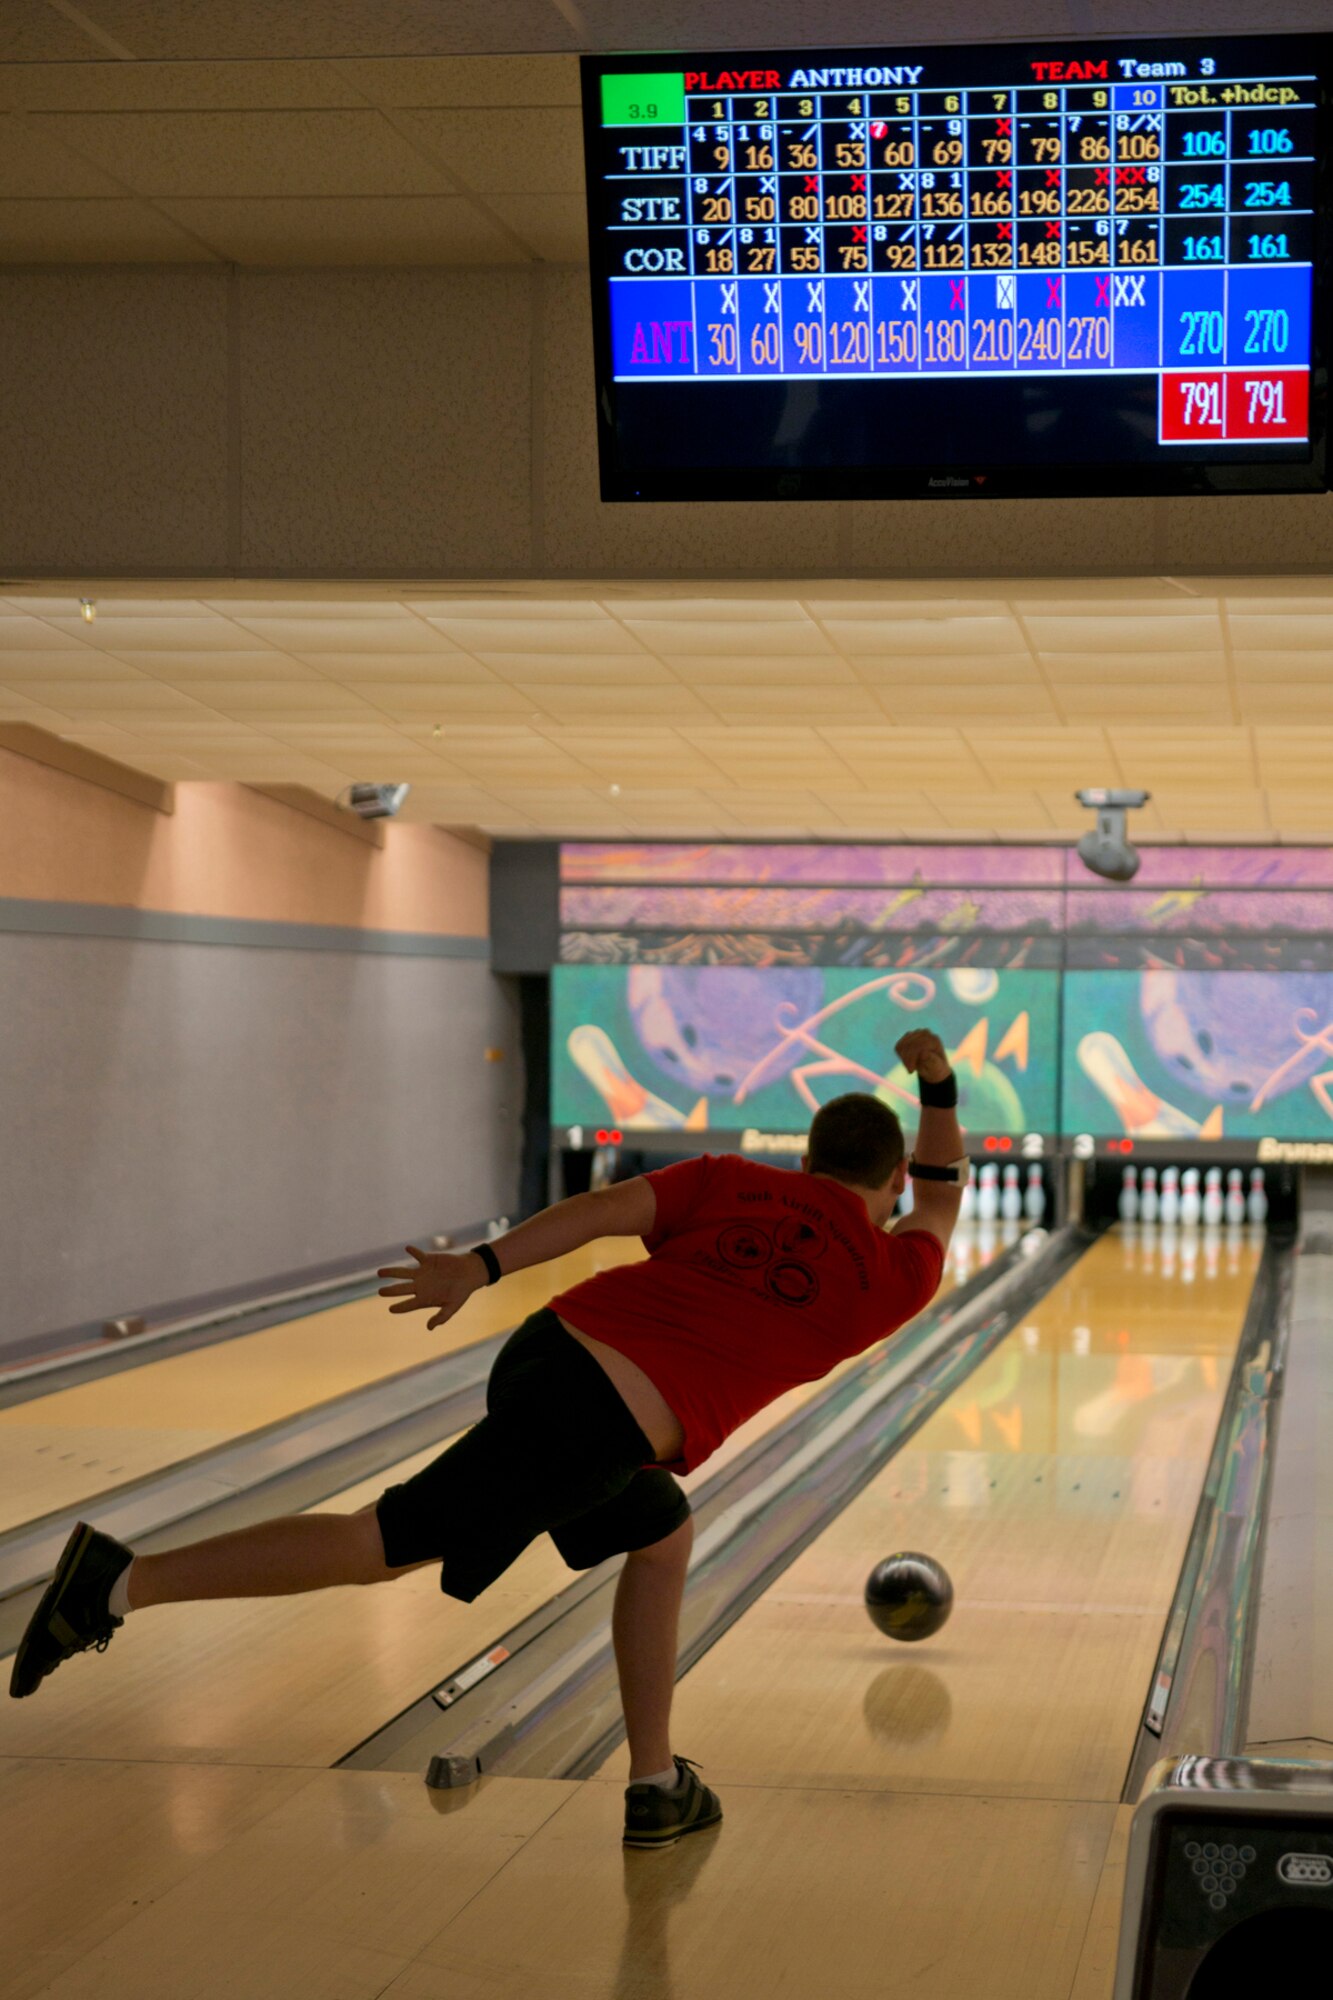 U.S. Air Force Senior Airman Anthony Szeluga, 50th Airlift Squadron, loadmaster, rolls what may be the final ball in a quest for the “perfect game” during the “sports day” Bowling Tournament, Oct. 8, 2015, on Little Rock Air Force Base, Ark. Hundreds of Airmen competed and volunteered at the base-wide event which  included more than 15 team competitions. (U.S. Air Force photo by Master Sgt. Jeff Walston/Released)